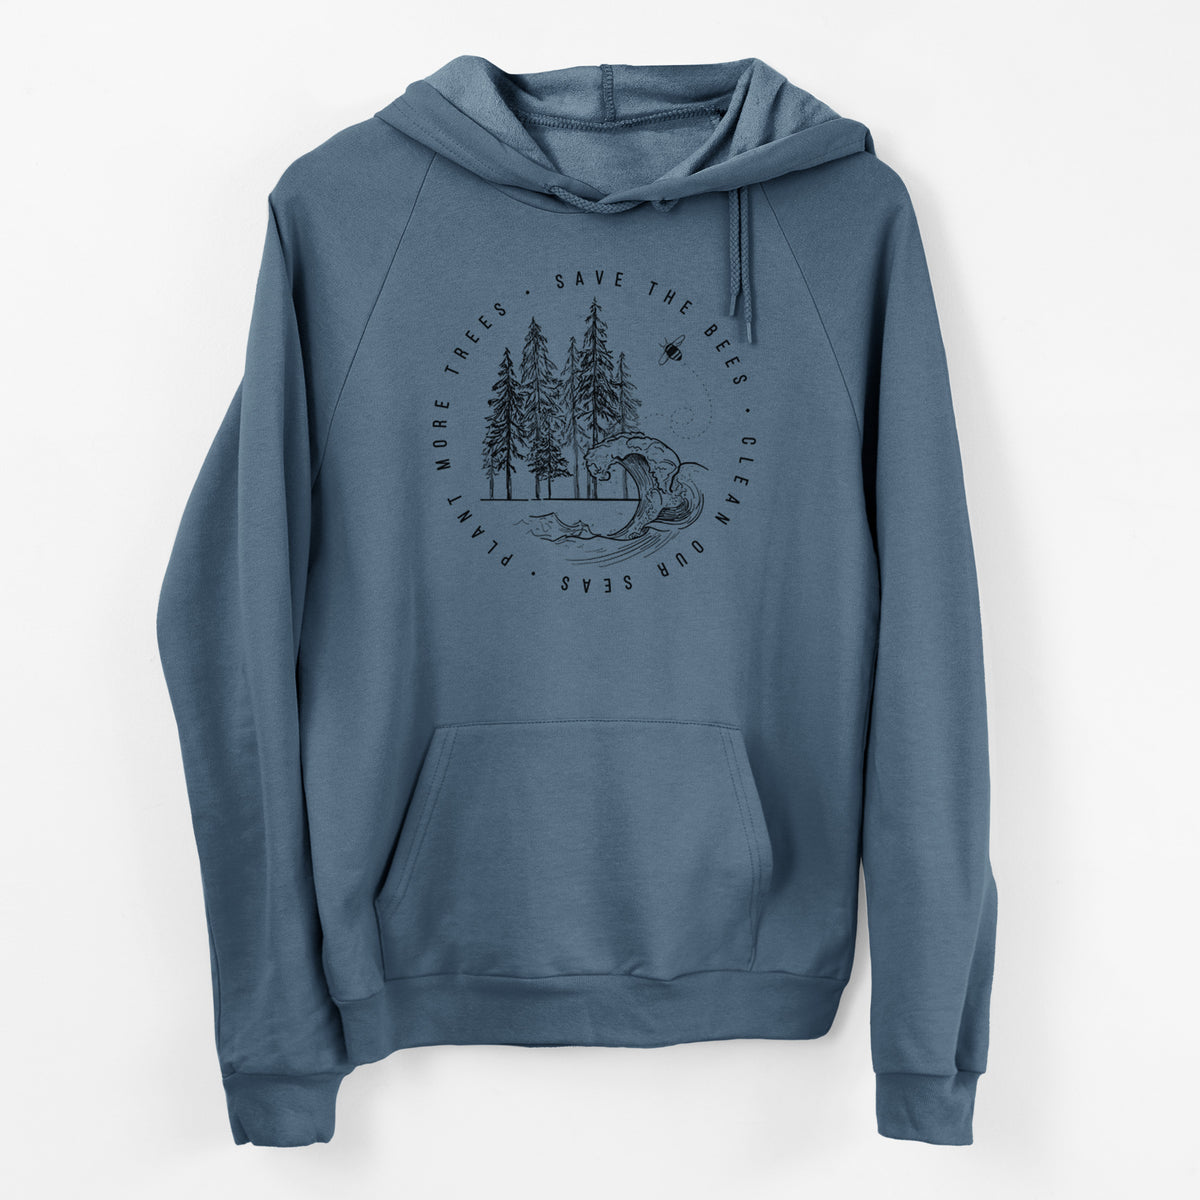 CLOSEOUT - Made in US Unisex Pullover Hoodie - 100% Organic Cotton